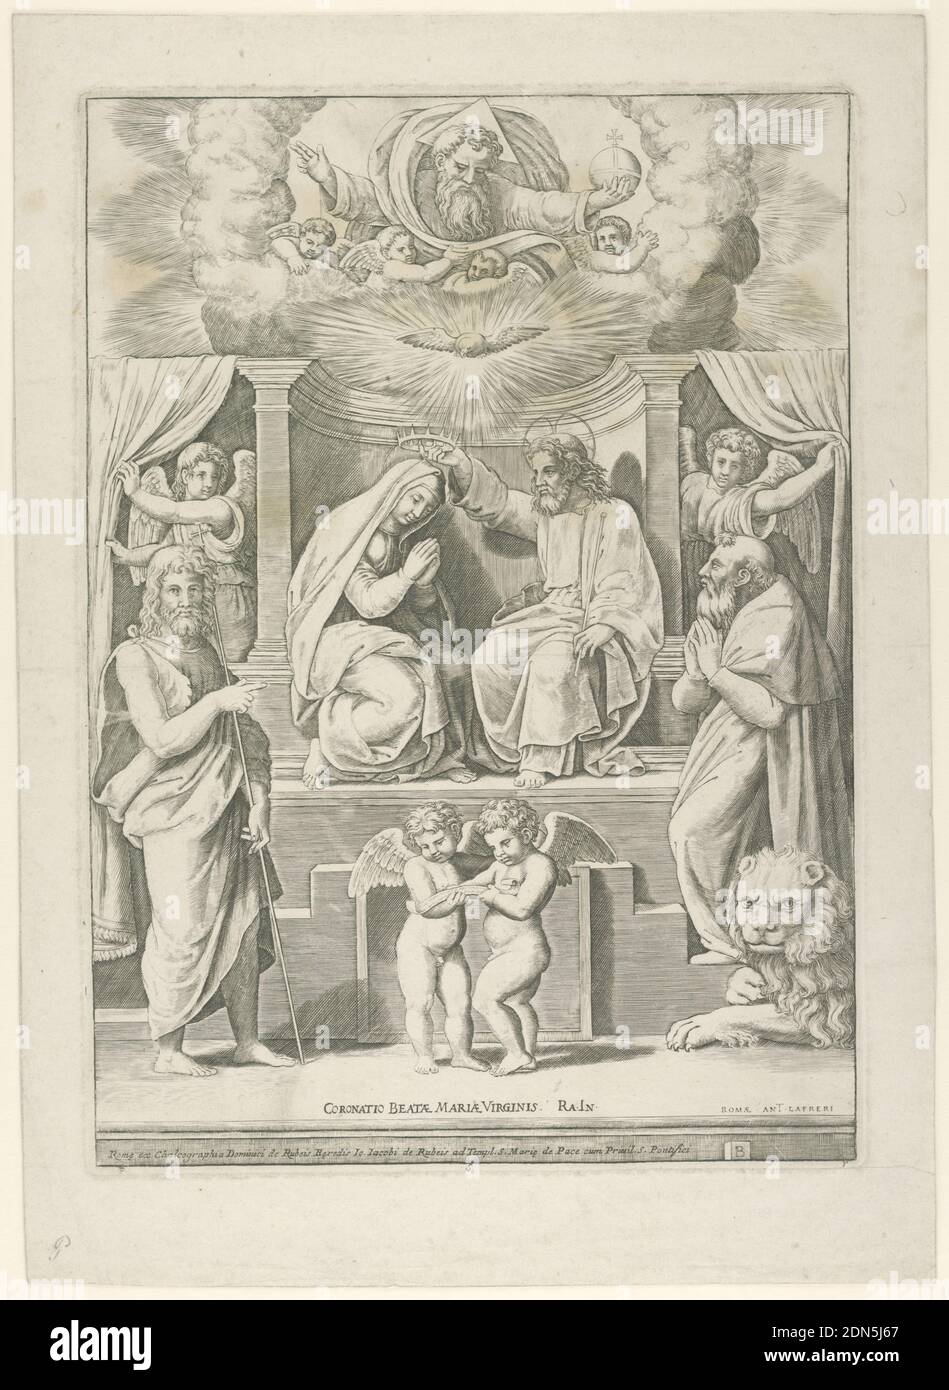 Coronation of the Virgin, Master of the Die, Italian or German, 1530 - 1560, Antoine Lafréry, French, 1512 - 1577, Raphael, (Italian, 1483–1520), Engraving, The Coronation of the Virgin: Virgin and Christ seated at center, flanked by two angels who draw back curtains. God the Father in upper register. Saint Jerome at right, with lion. At left, Saint John the Baptist. Two putti in foreground., Italy, 1530–1560, religion, Print Stock Photo